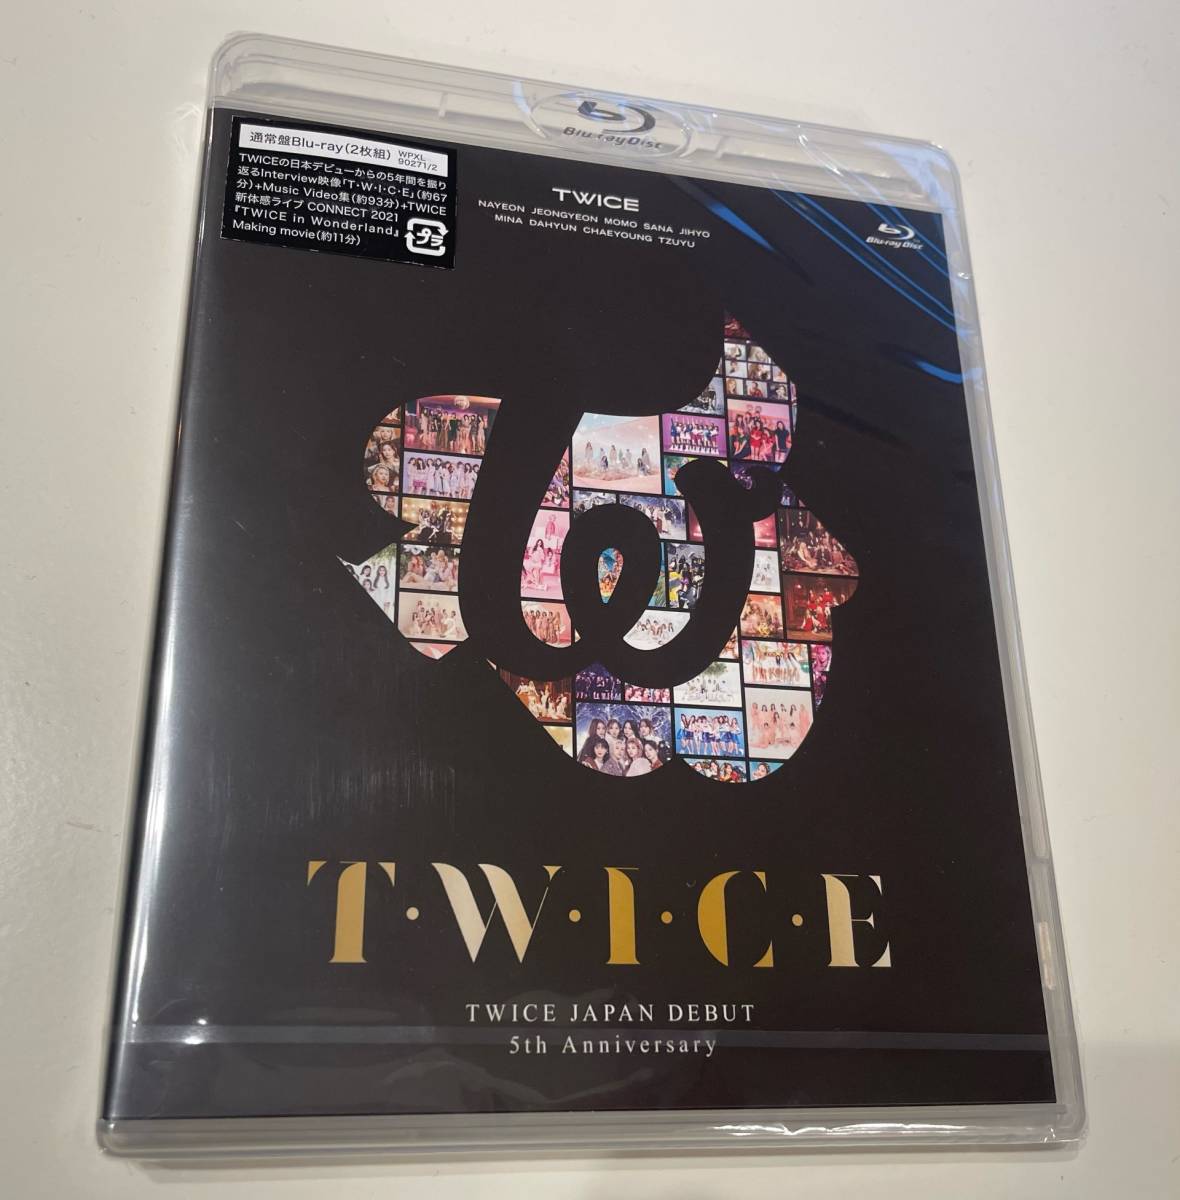 M anonymity delivery Blu-ray Blue-ray TWICE JAPAN DEBUT 5th Anniversary T*W*I*C*E general record 2 sheets set 4943674352531